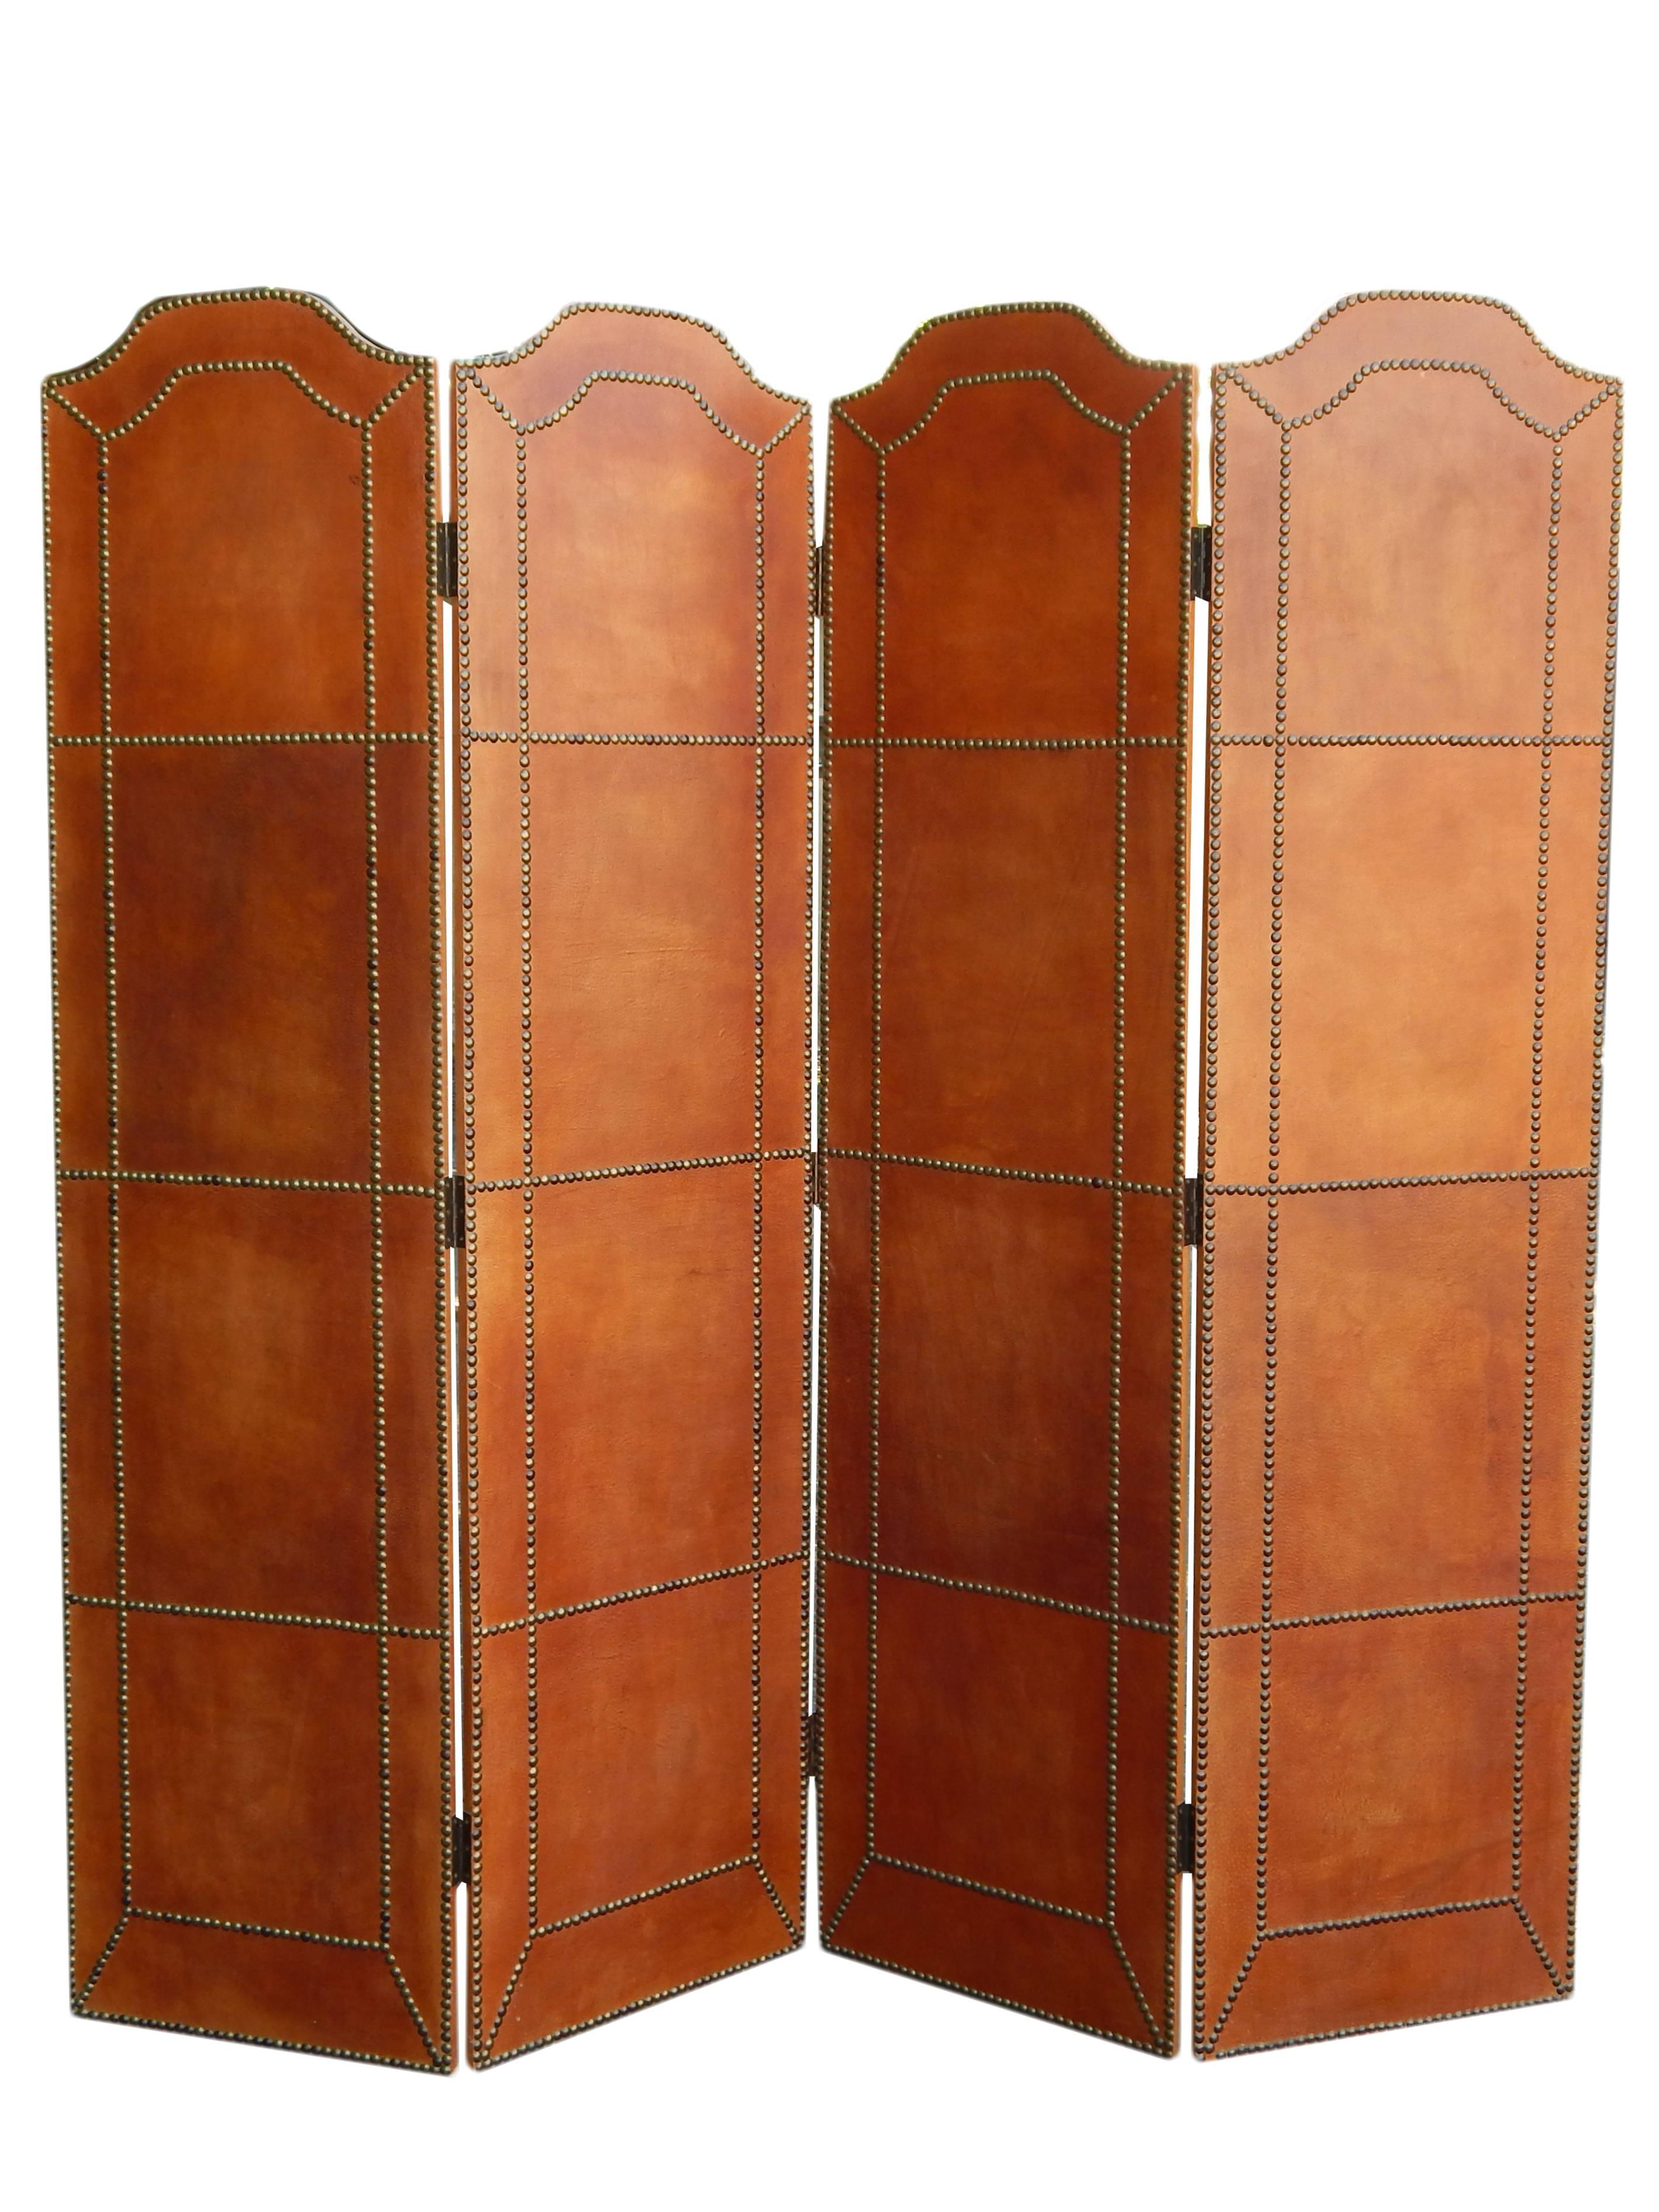 Four part folding screen in caramel pigskin with brass tacks. Screen is in excellent shape with only a few tacks having some tarnish.
Each panel is 18 inches wide.